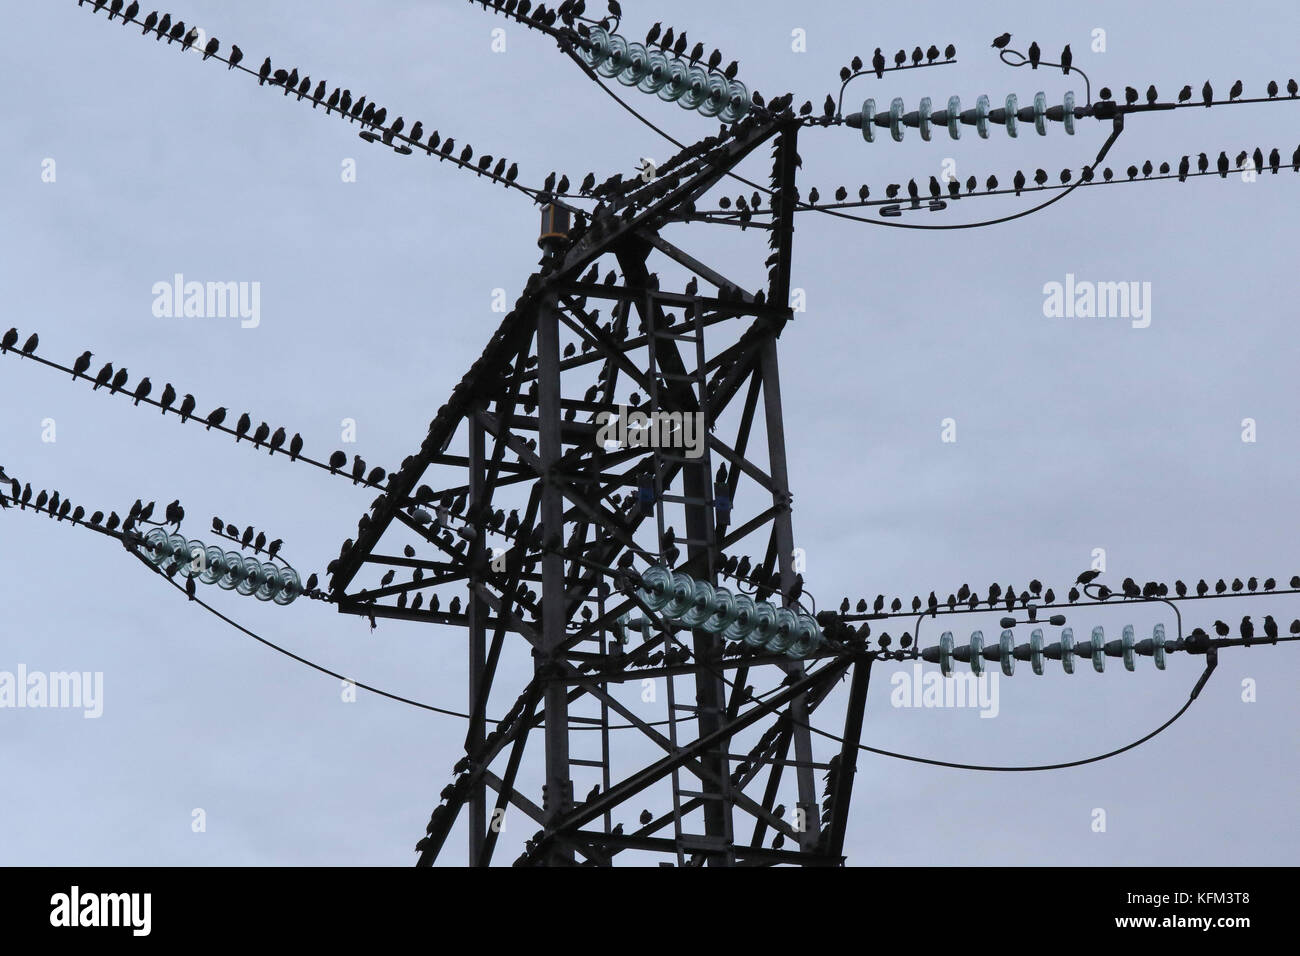 Belfast, Northern Ireland UK. 30 October 2017. Grey but dry but as the light falls dramatically it's time for the starlings to get ready to roost. This pylon and cables contains only a fraction of the birds that roost nearby under the bridges over the River Lagan. A calm day meant the air was filled with their chirping and chattering.Credit: David Hunter/Alamy Live News. Stock Photo